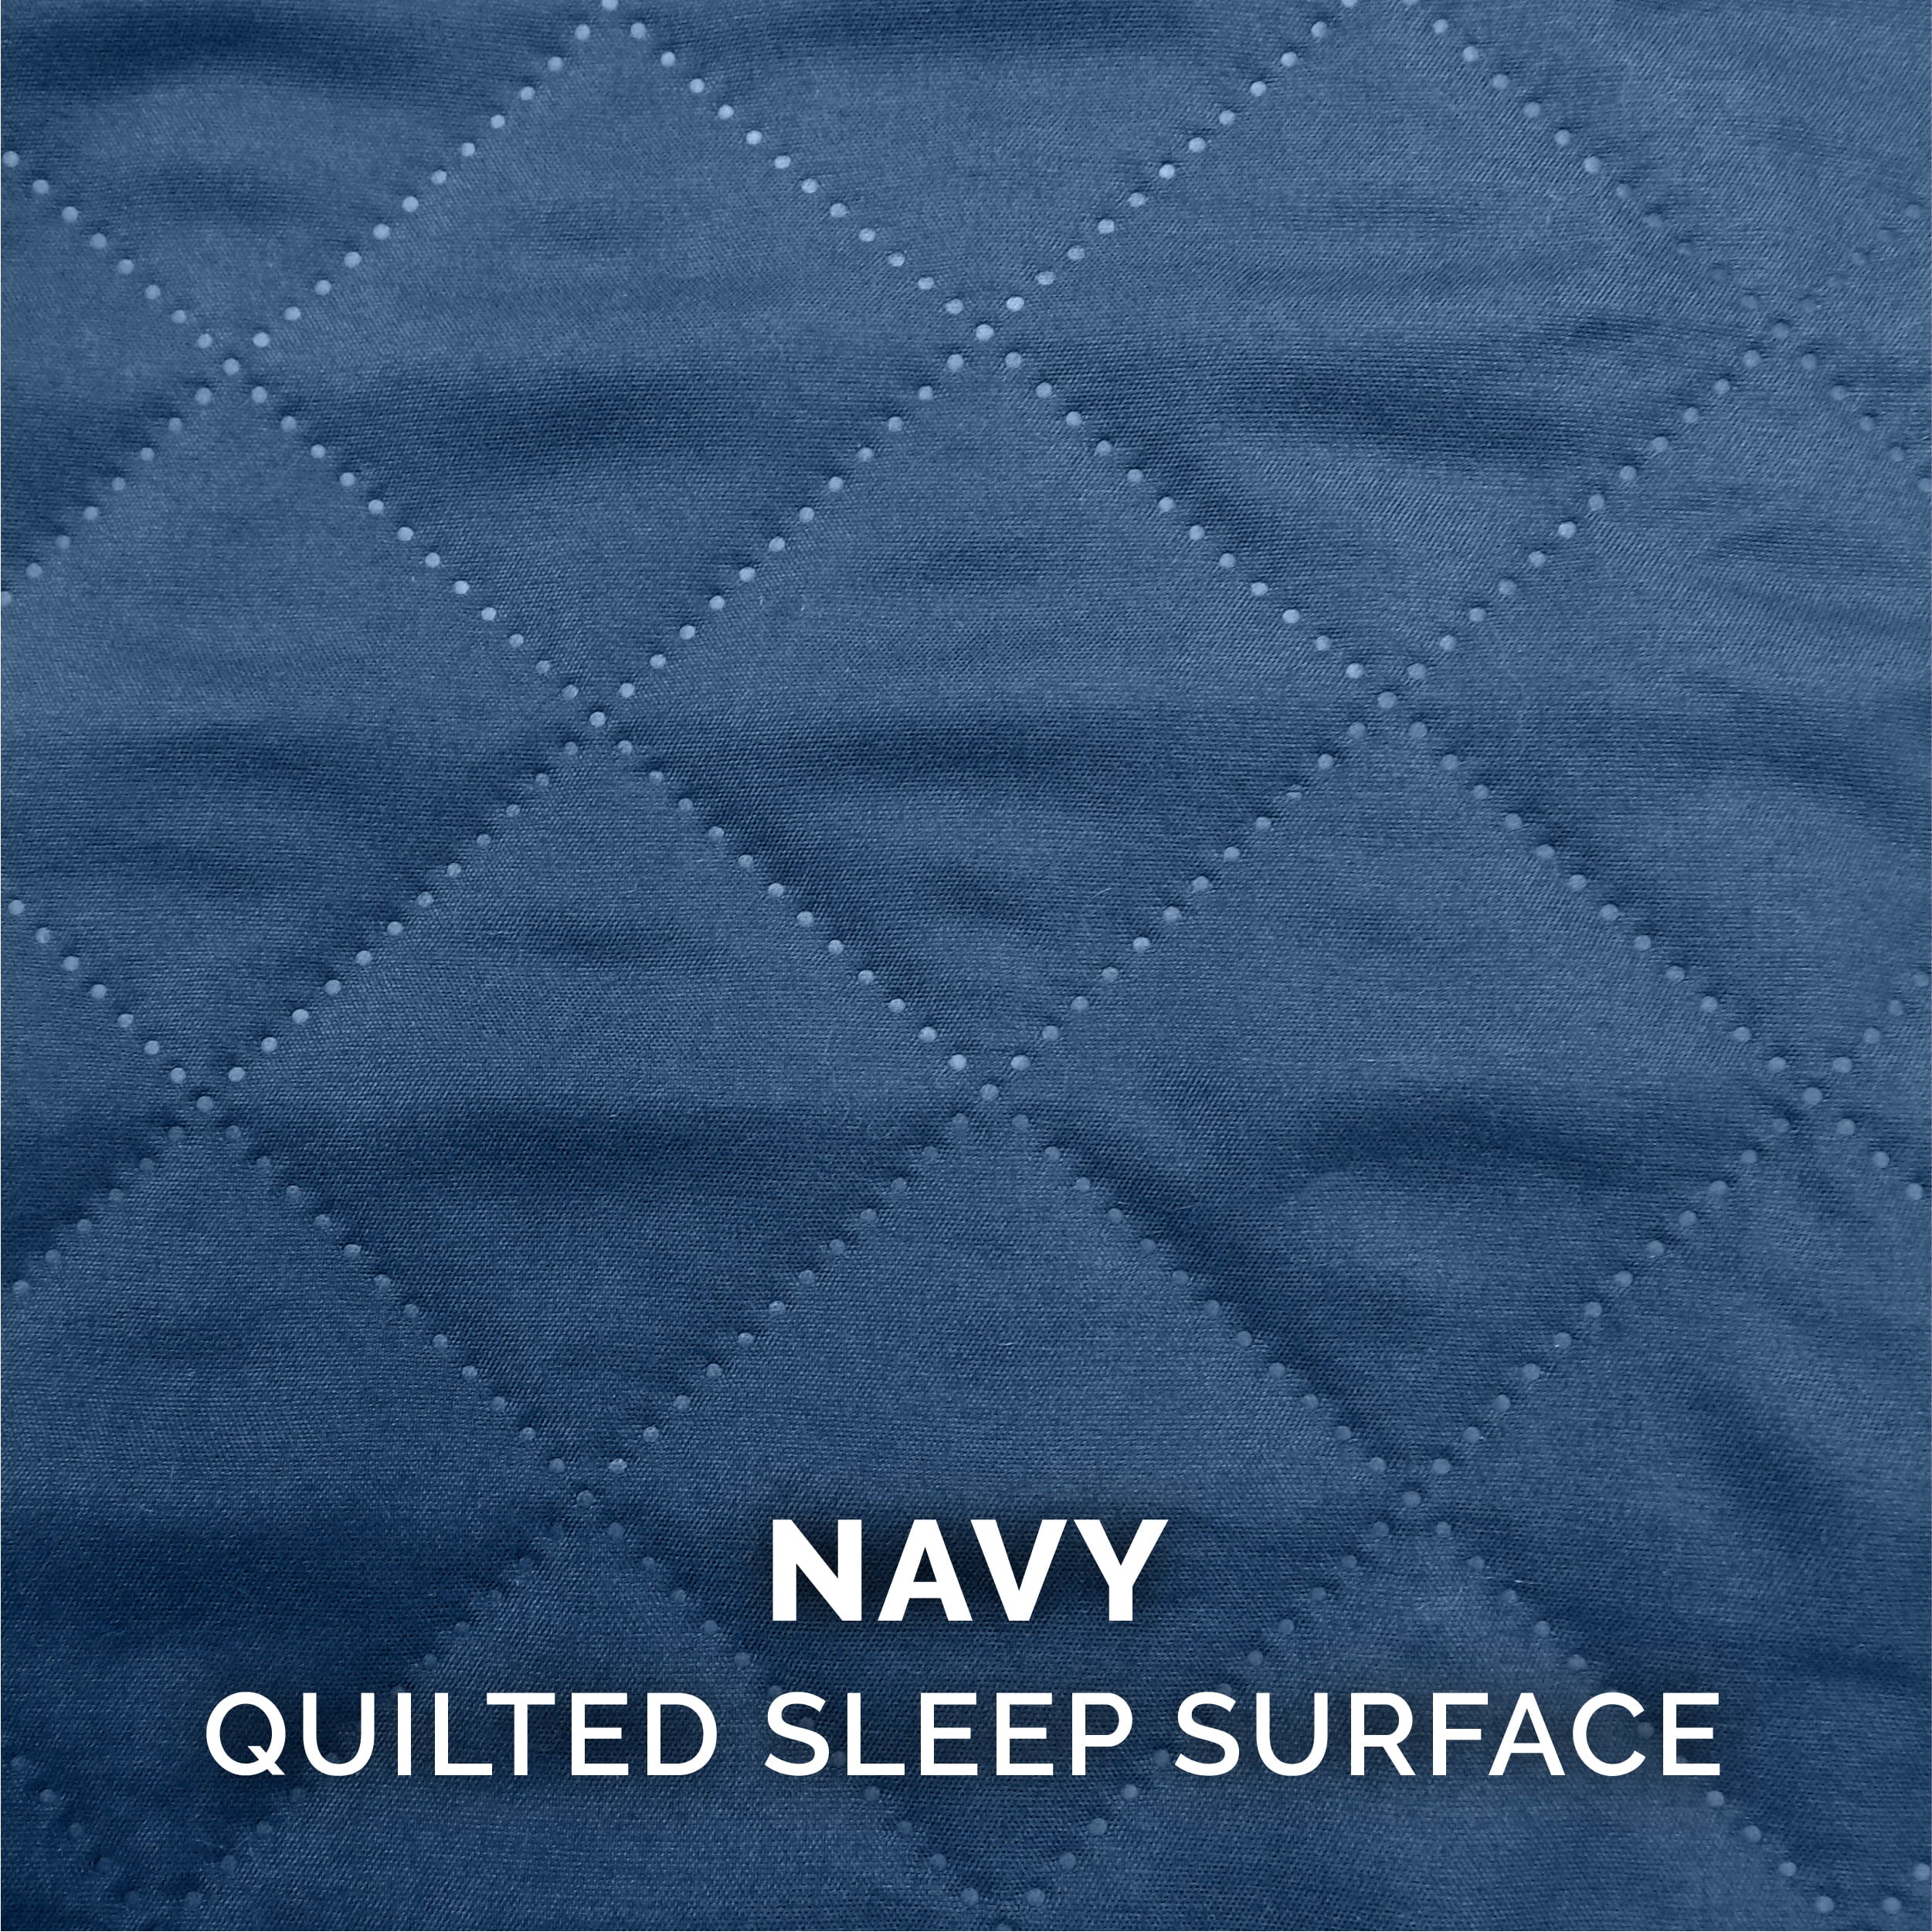 FurHaven Pet Products | Full Support Orthopedic Quilted Sofa Pet Bed for Dogs and Cats - Navy， Small